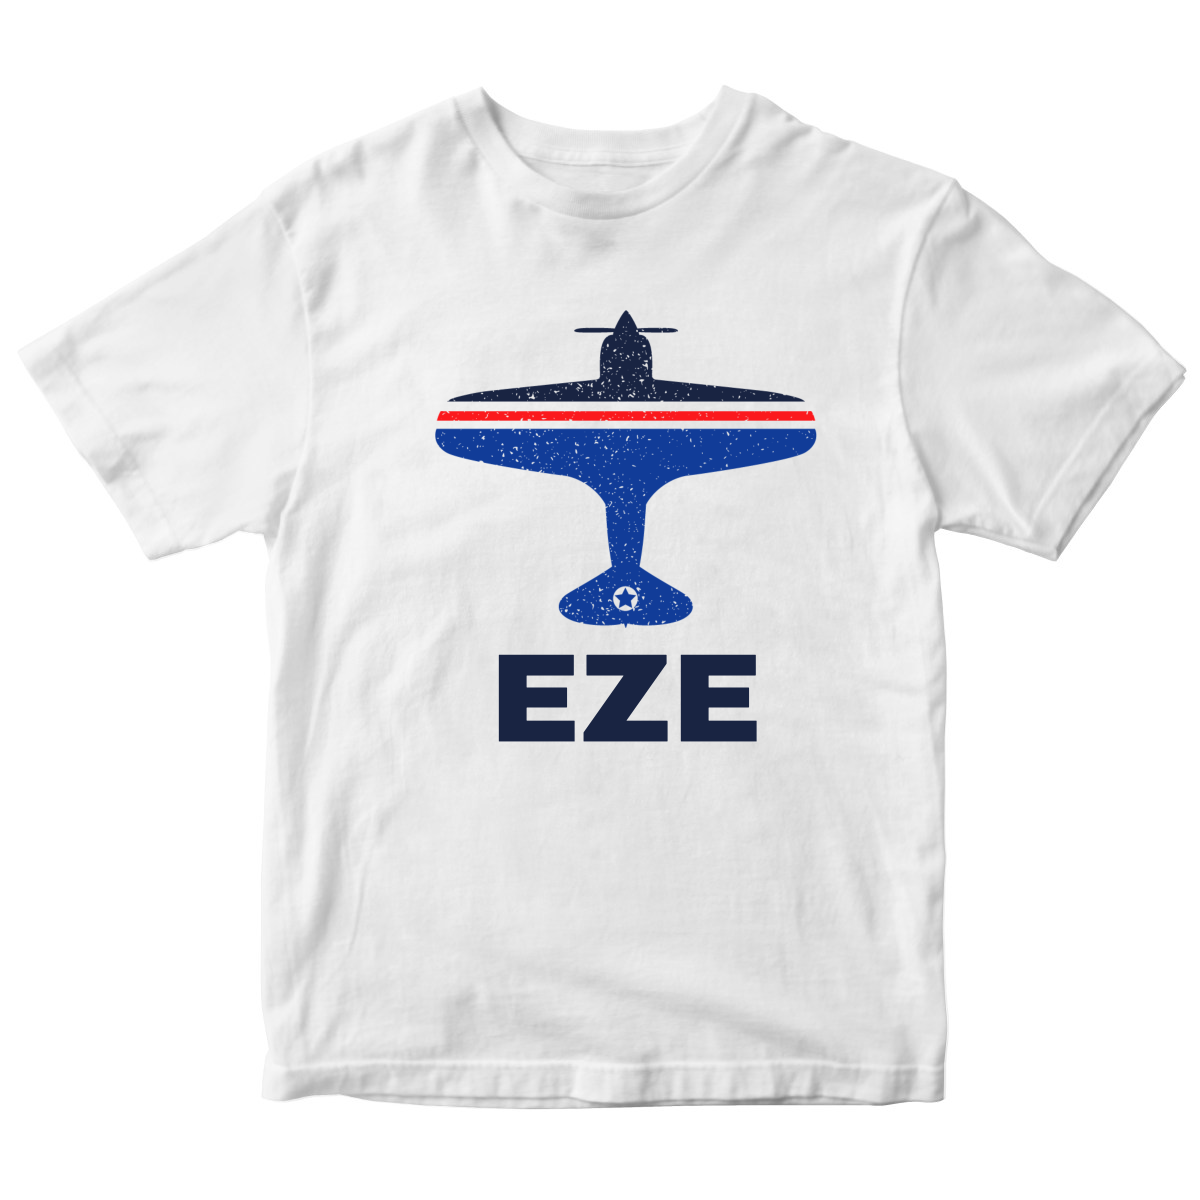 Fly Buenos Aires EZE Airport Kids T-shirt | White